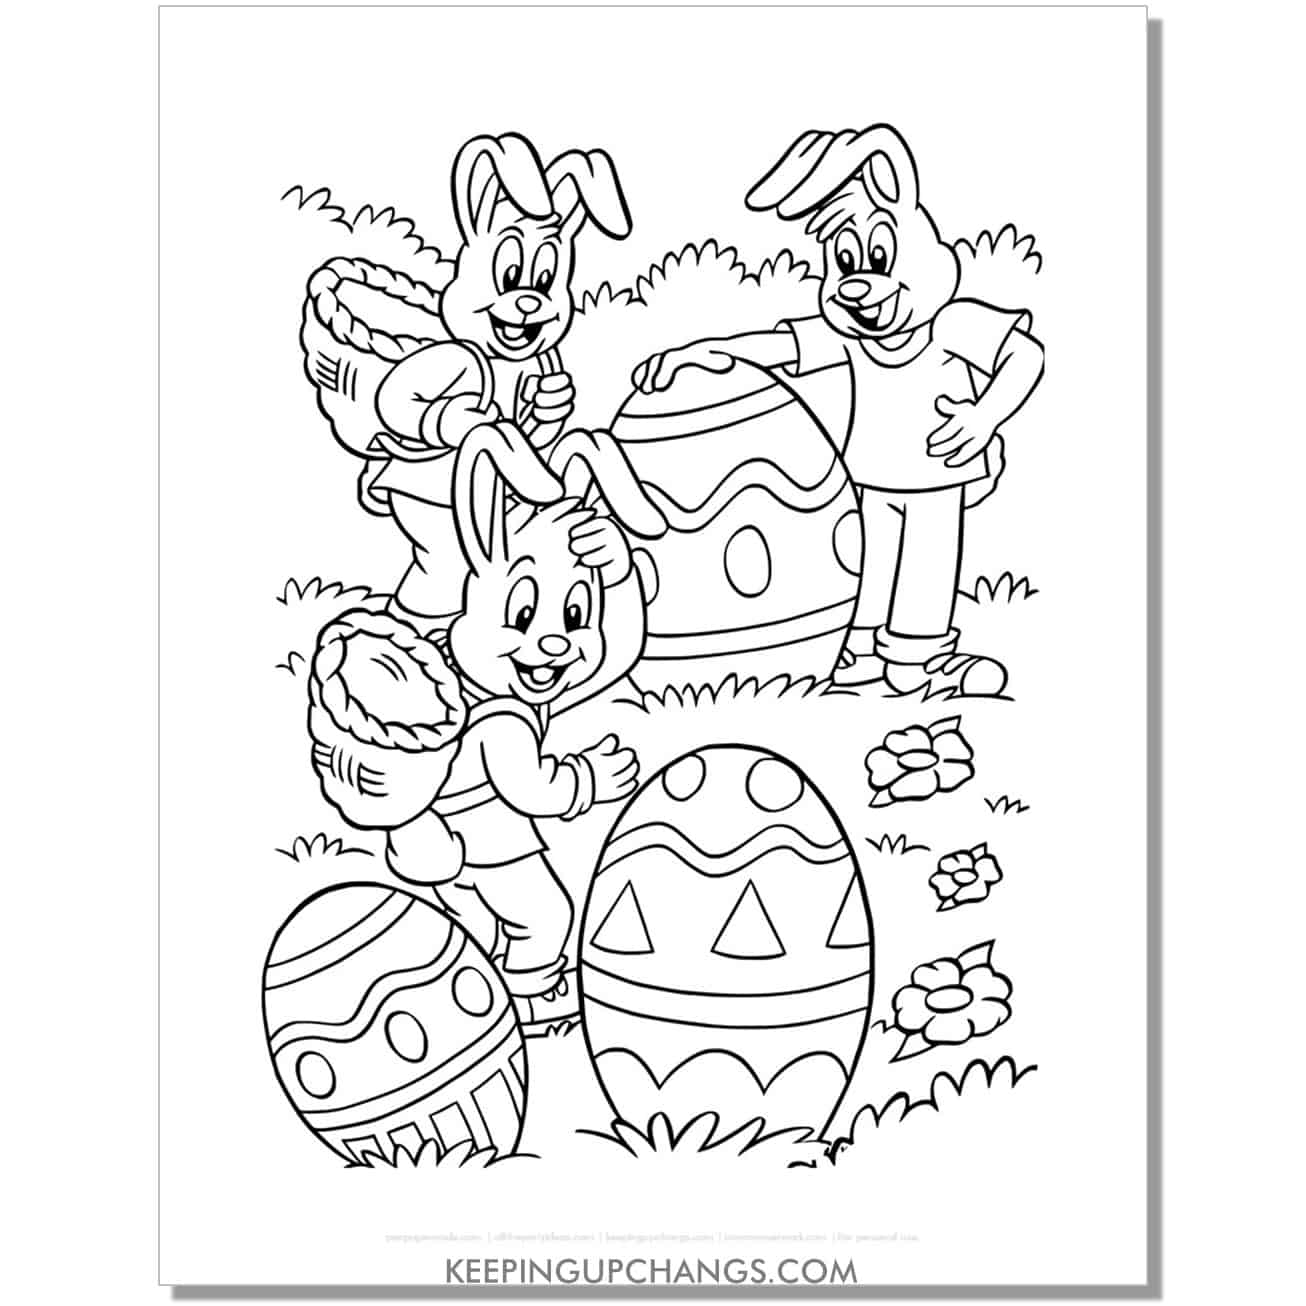 easter bunnies on egg hunt coloring page, sheet.